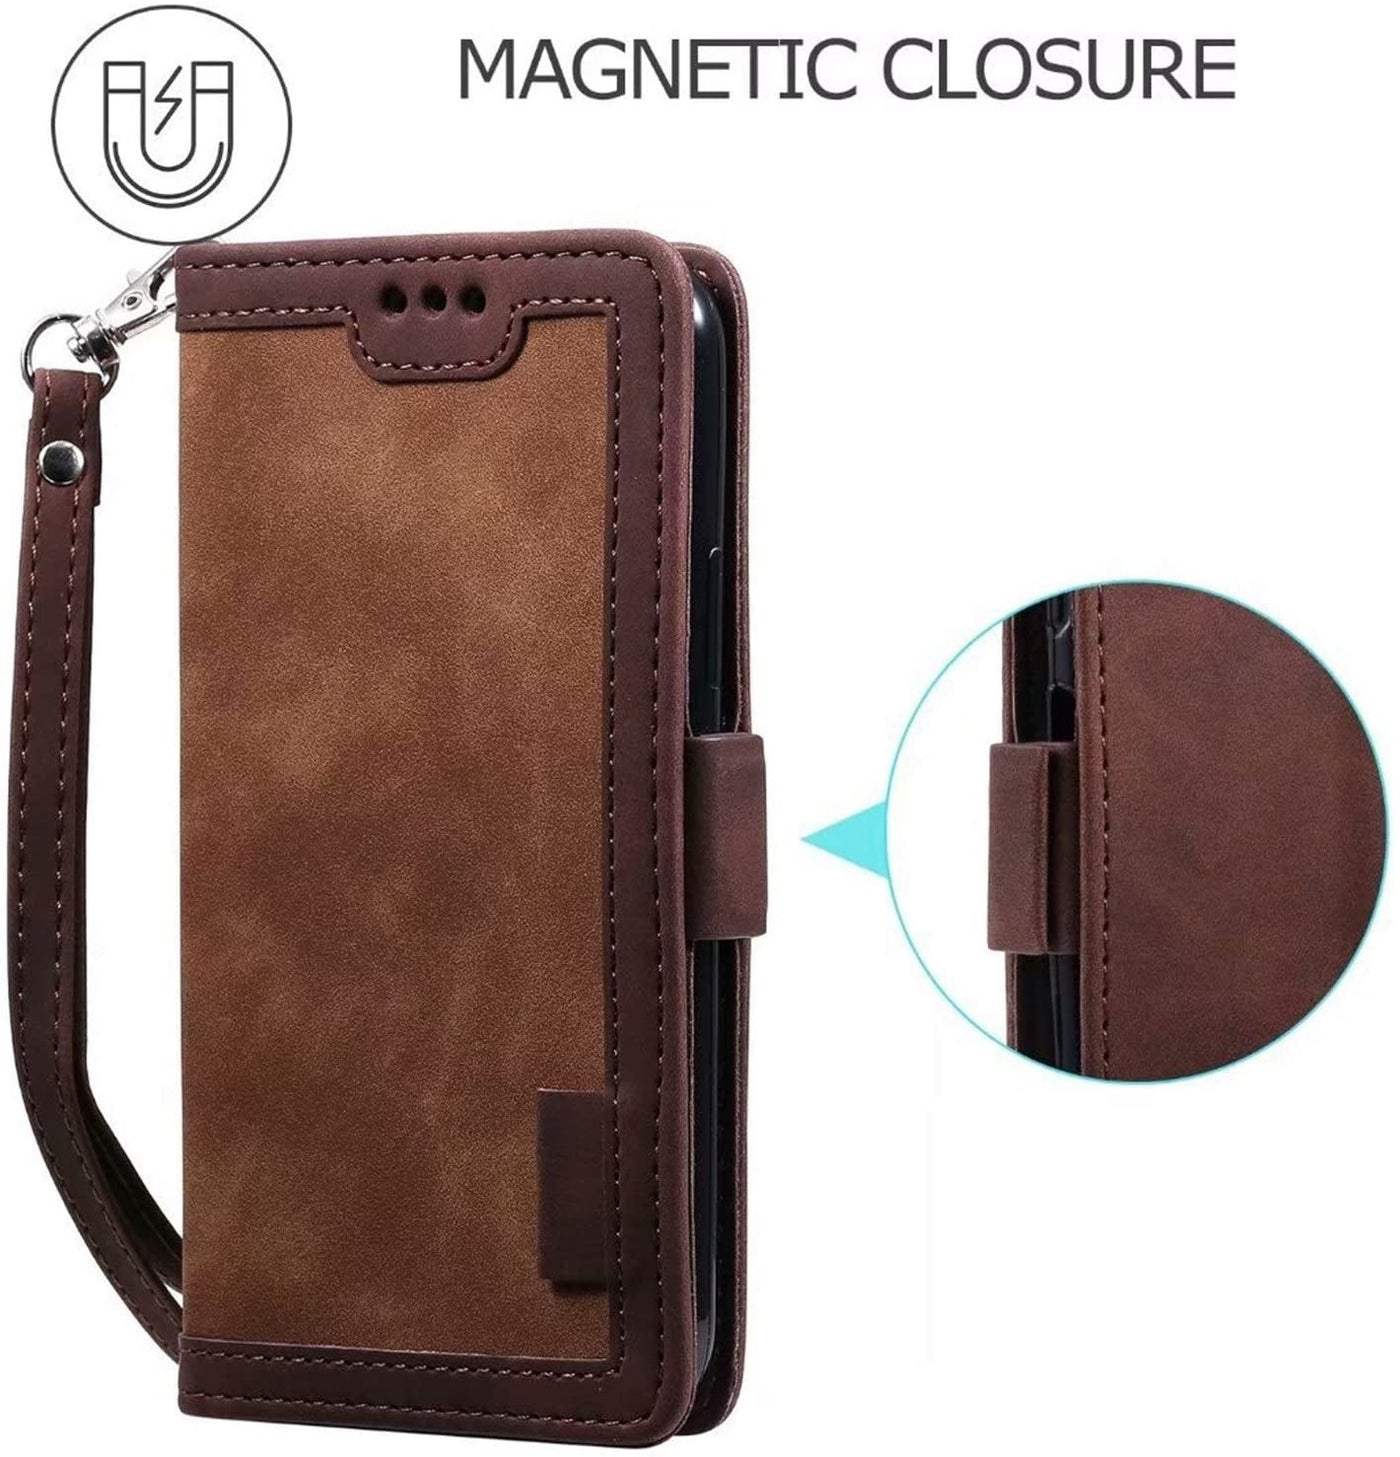 Samsung Galaxy S21 FE Magnetic flip Wallet case cover